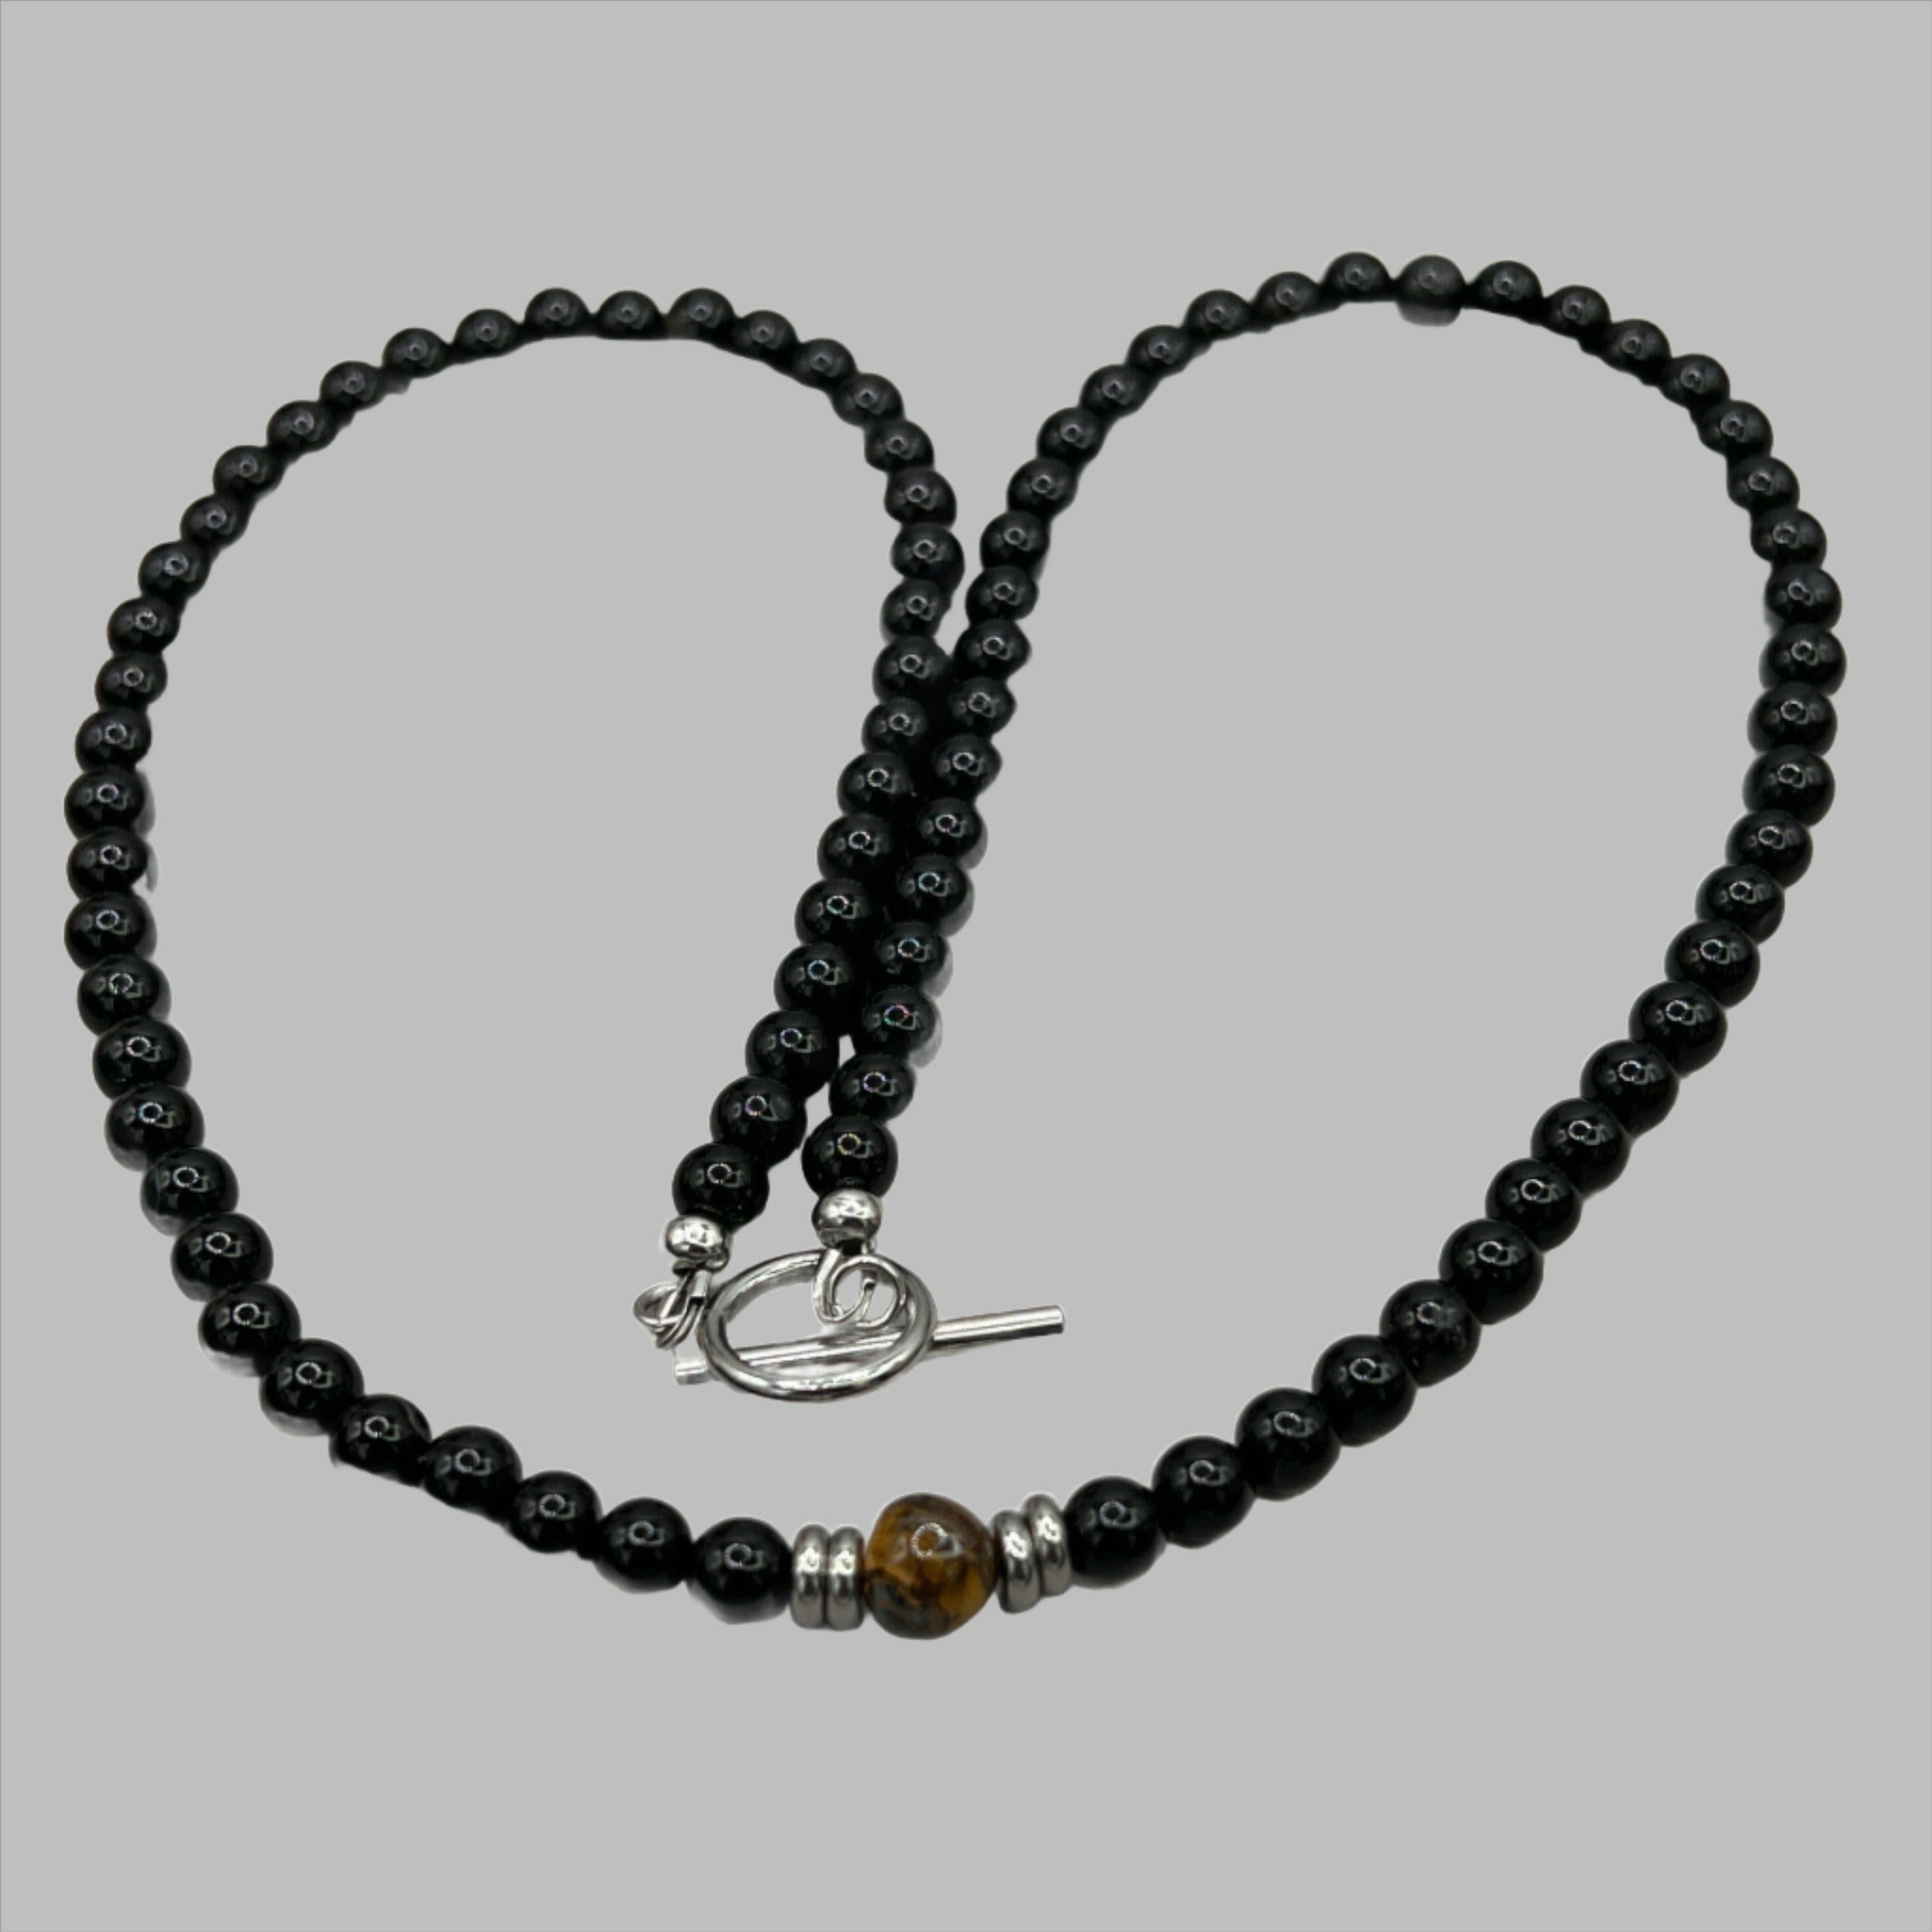 Bec Sue Jewelry Shop Necklaces 20 inch / black / onyx 8mm and tiger eye Onyx & Tiger Eye Sterling Silver Necklace Tags 662